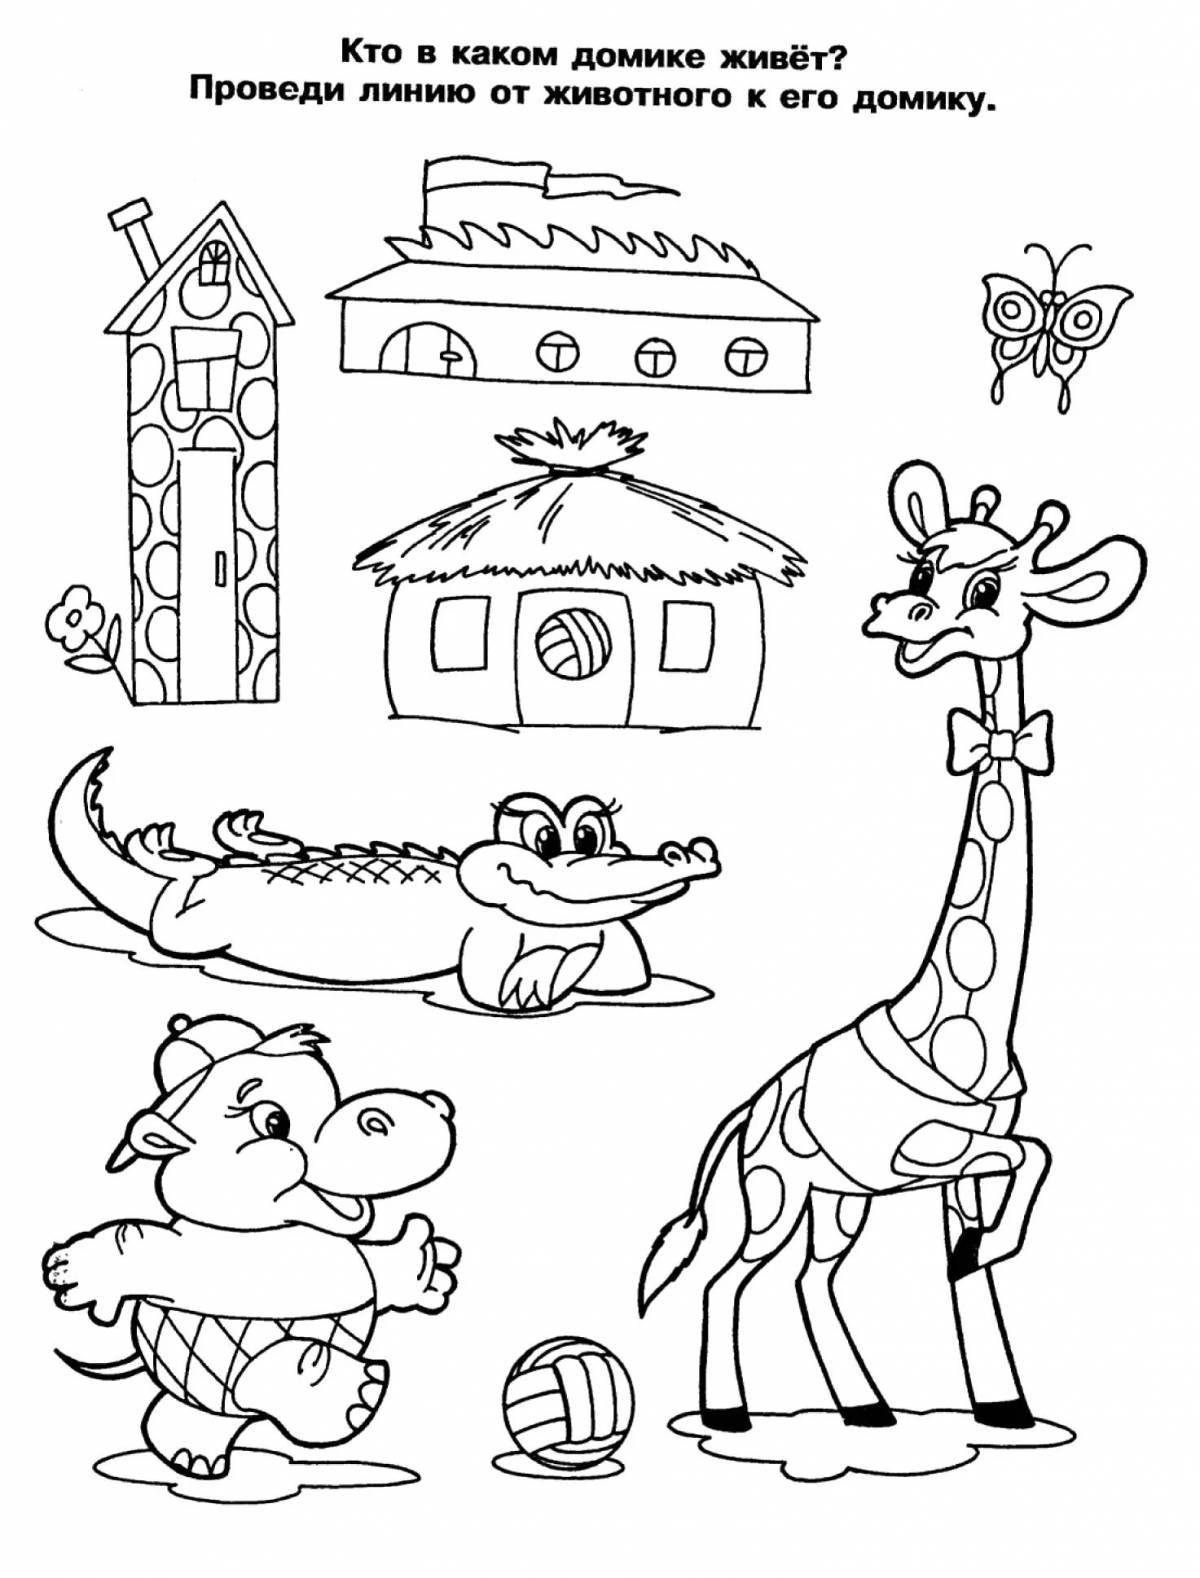 Educational coloring book for children 4-5 years old